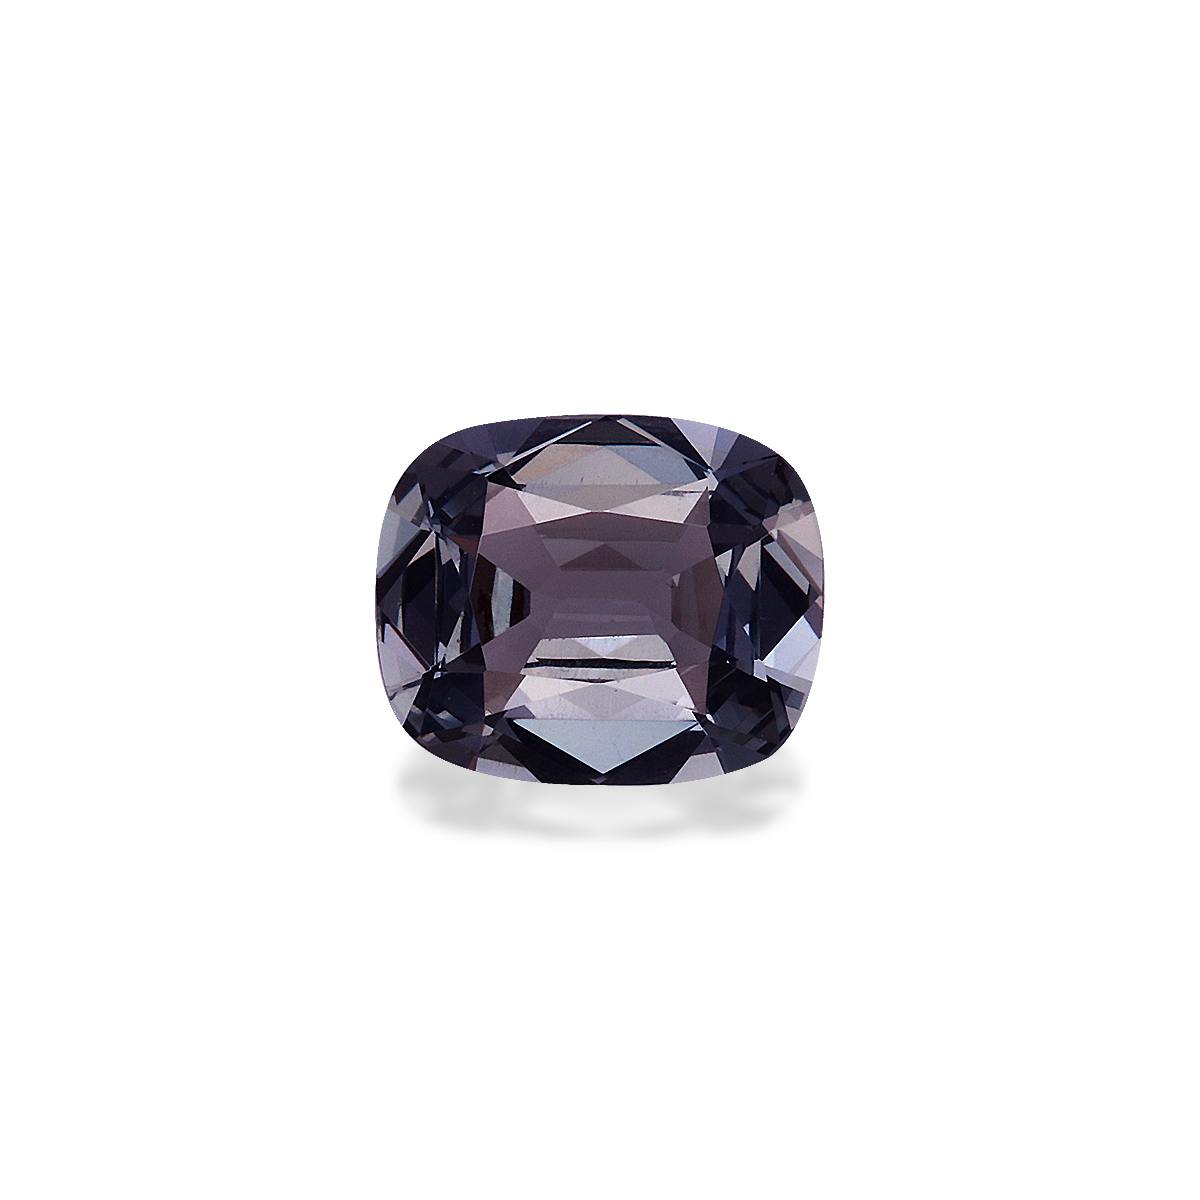 Grey Spinel 1.27ct (SP0229)